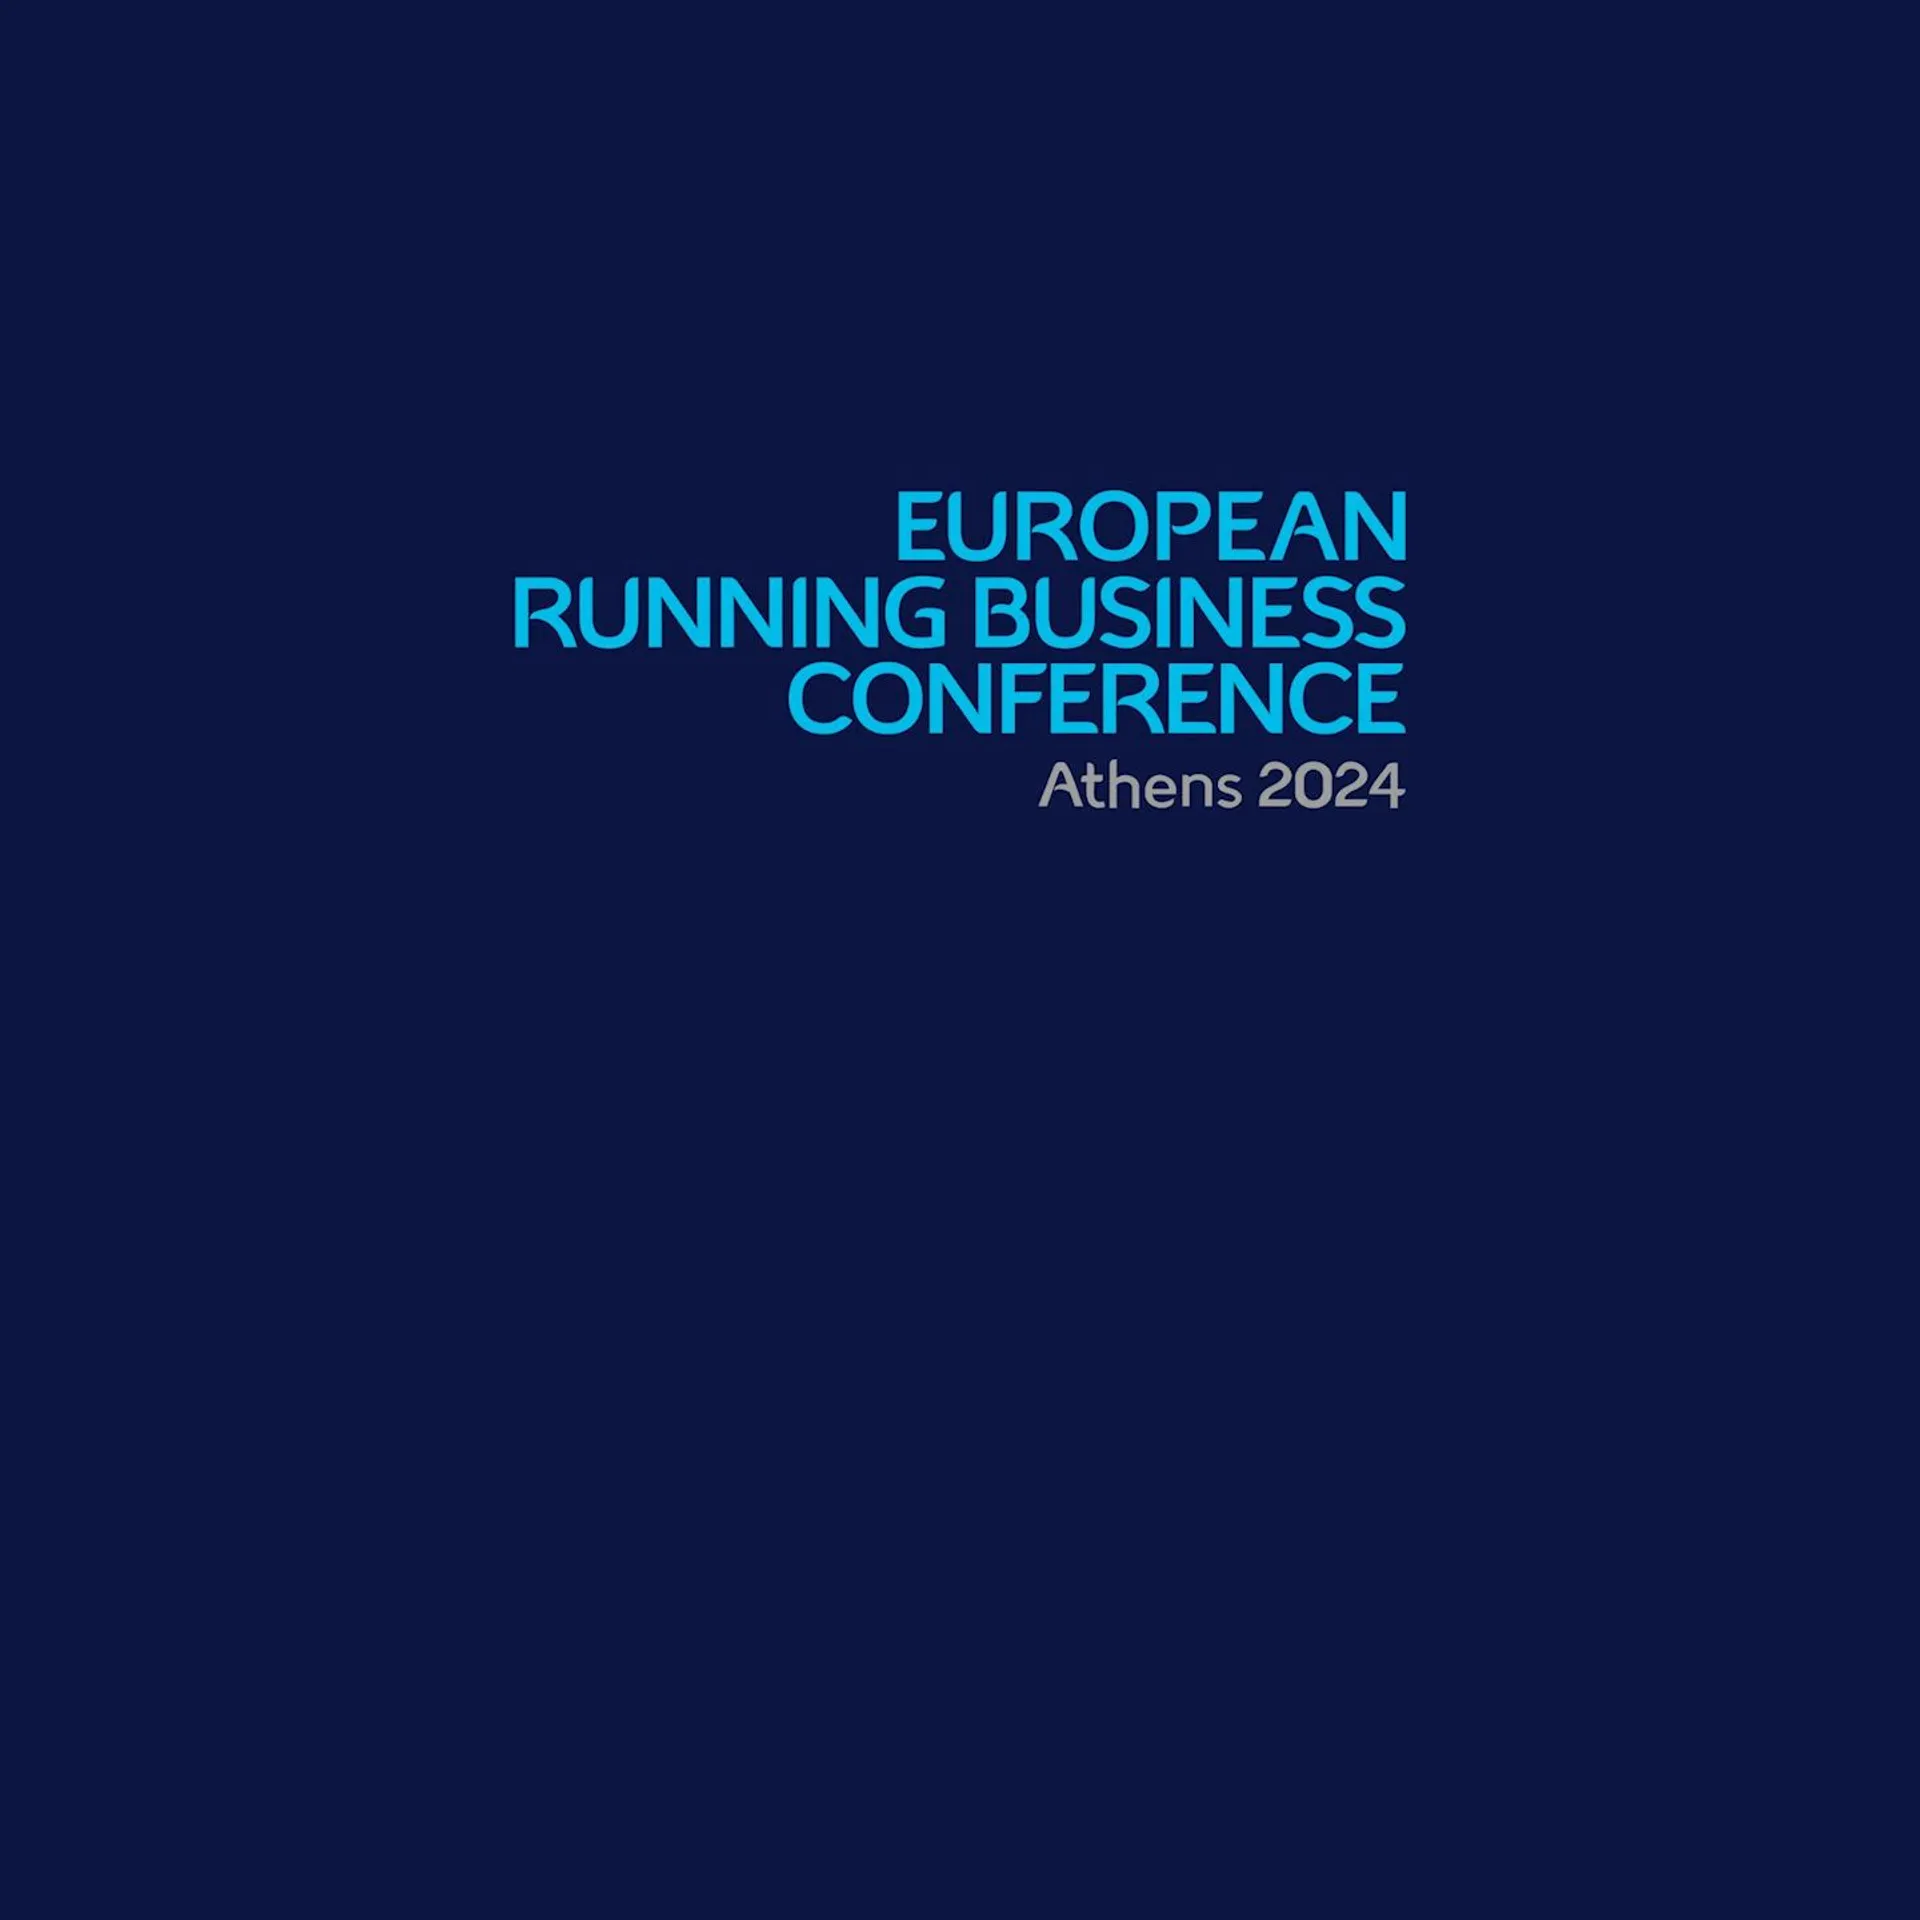 European Running Business Conference 2024